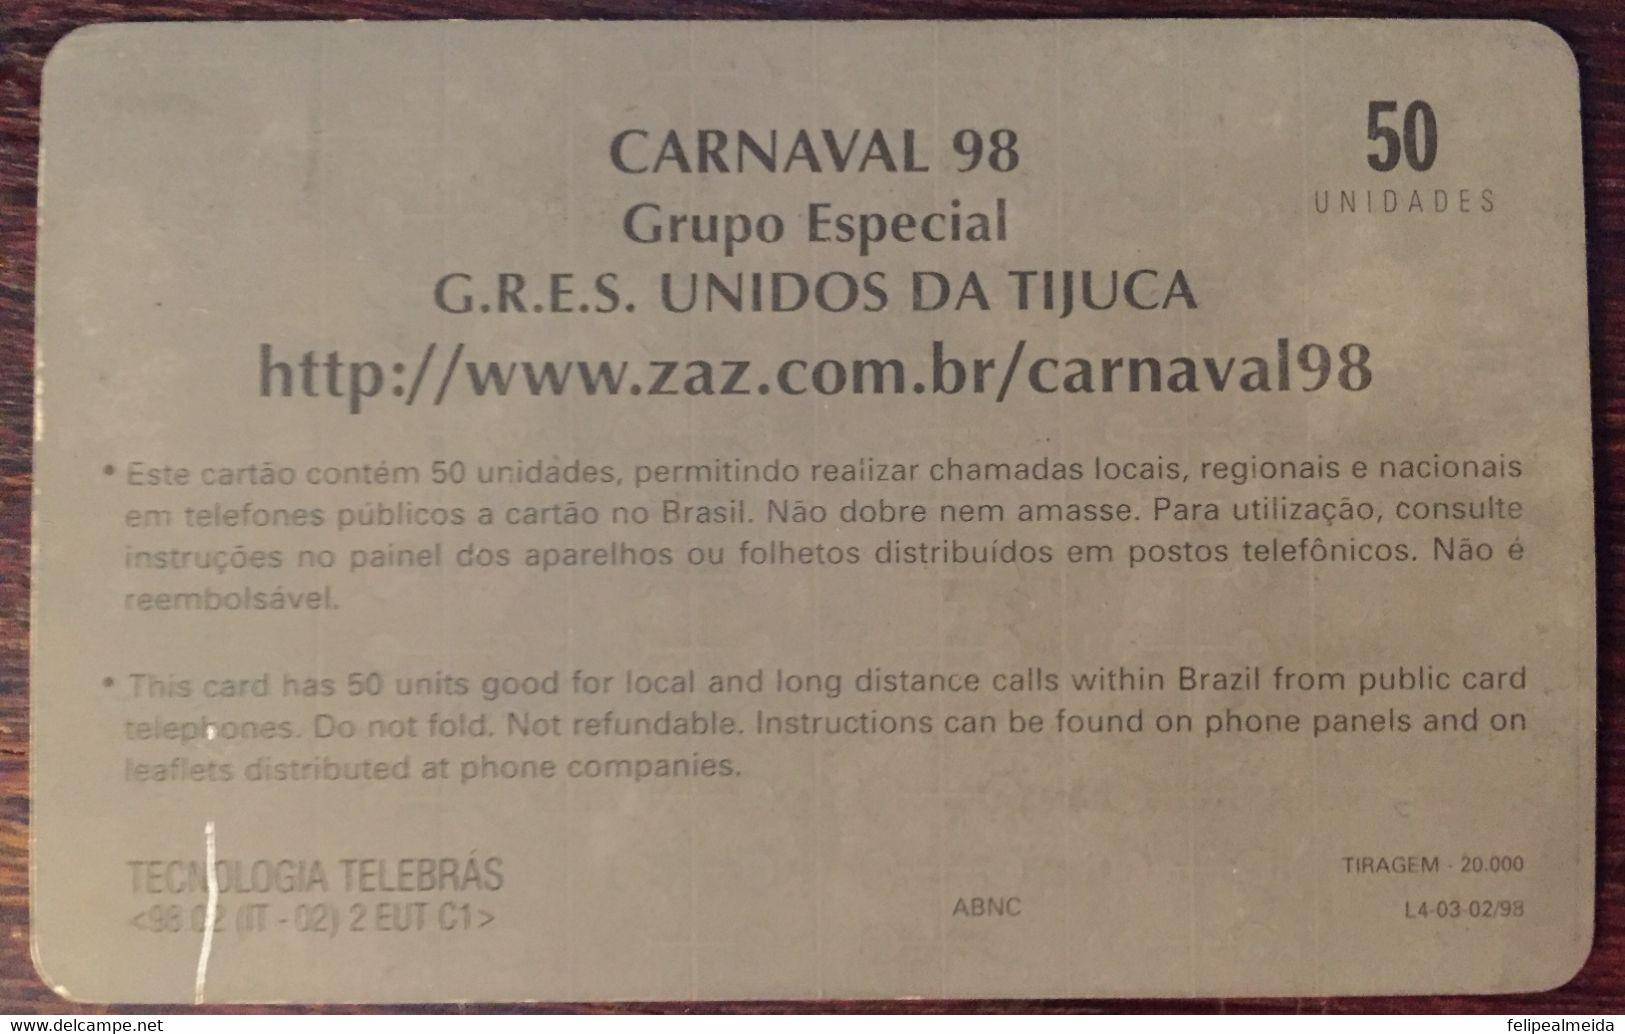 Phone Card Manufactured By Telebras In 1998 - Carnival Of 1998 - Series Special Group Of Samba Schools Of Rio De Jan - Culture